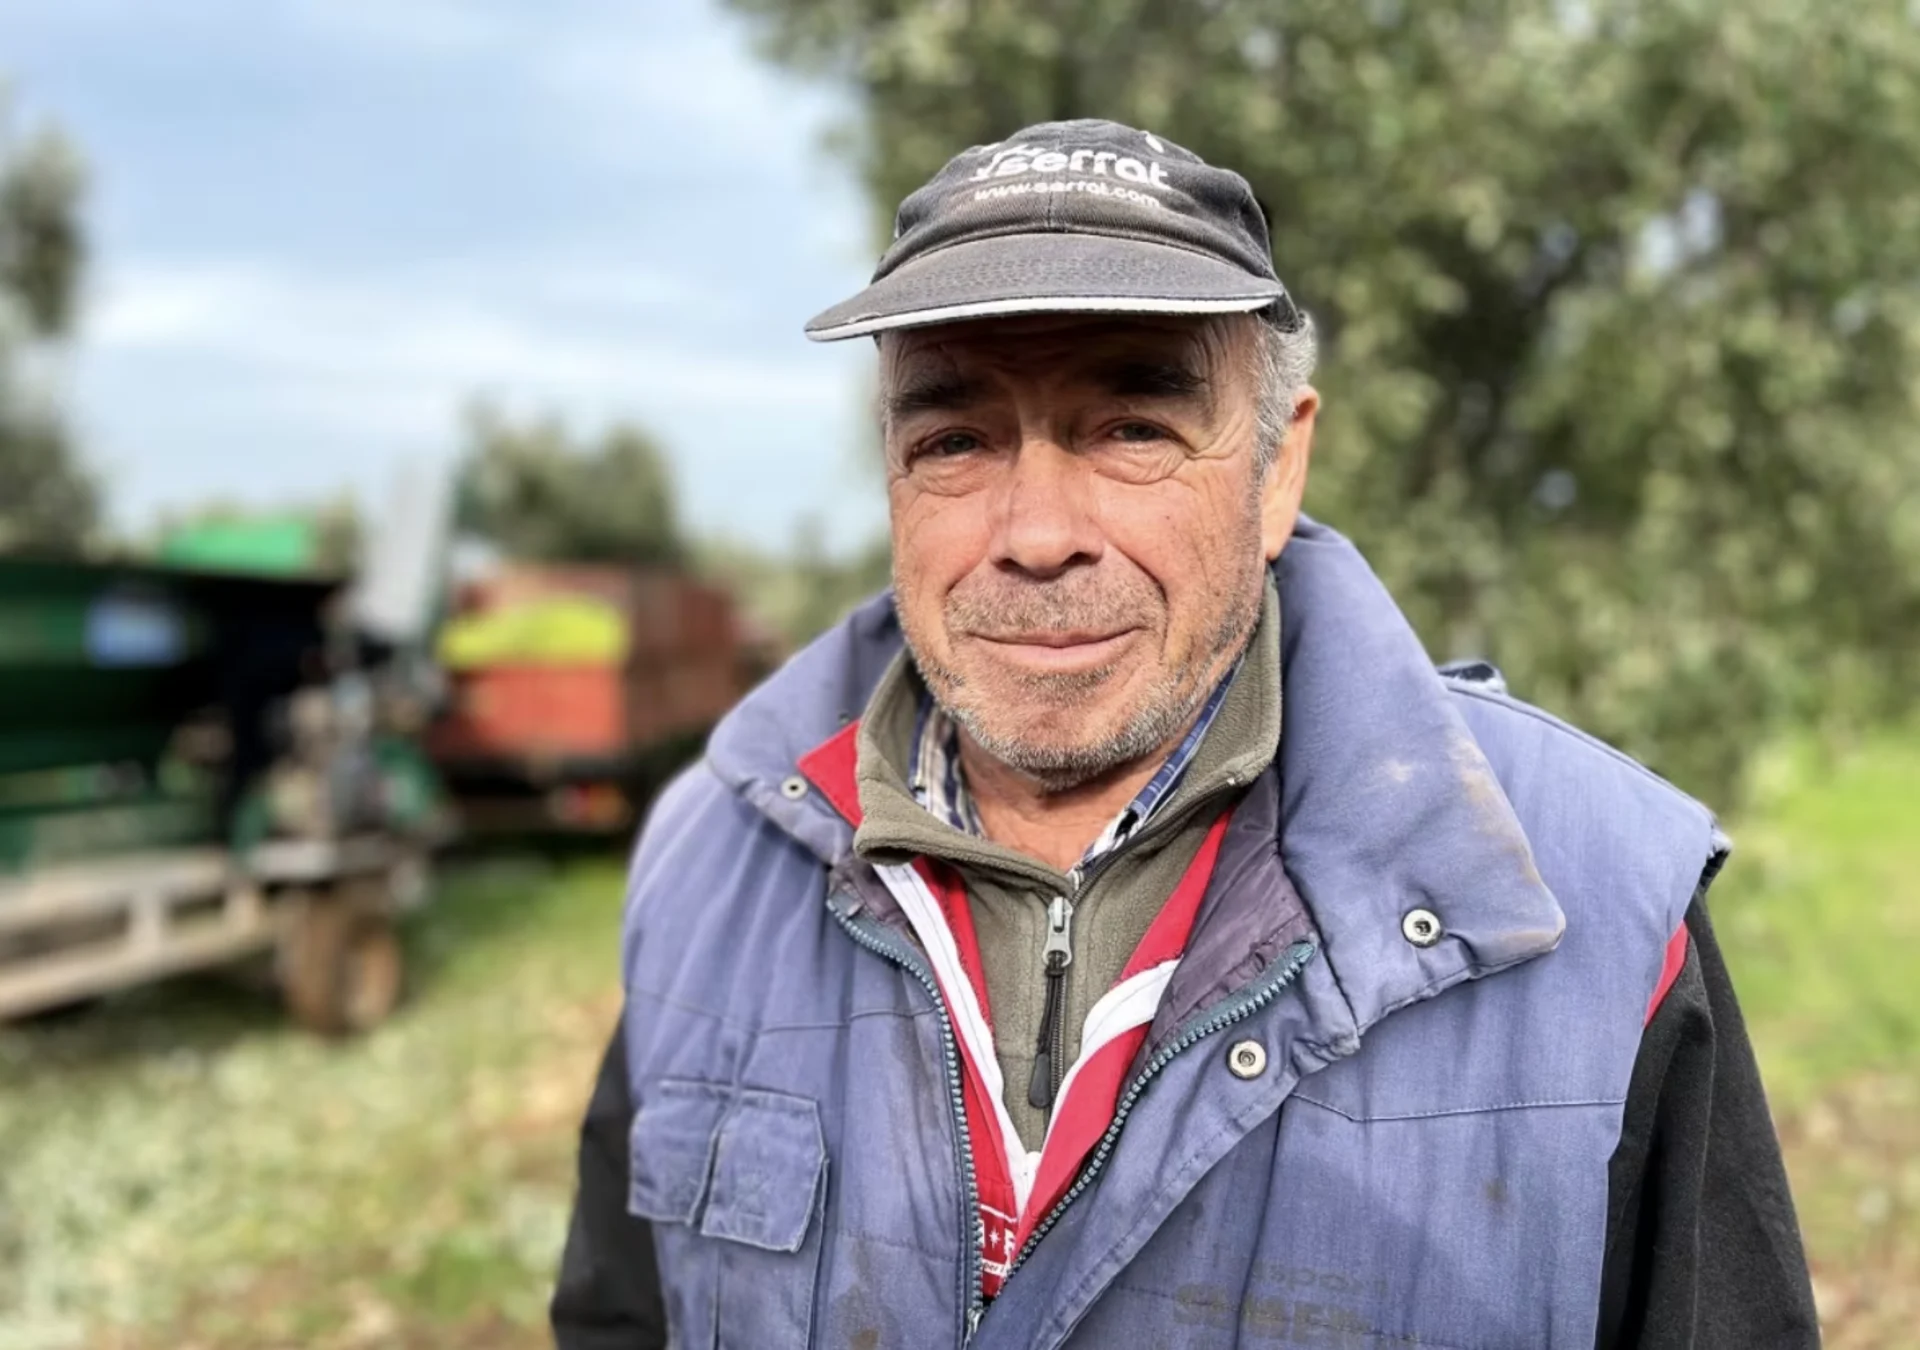 CBC: Vincenzo Zaccaria has been harvesting olives in Puglia for 35 years, and says that seeing olive trees dying 'brings tears to my eyes.' (Megan Williams/CBC)